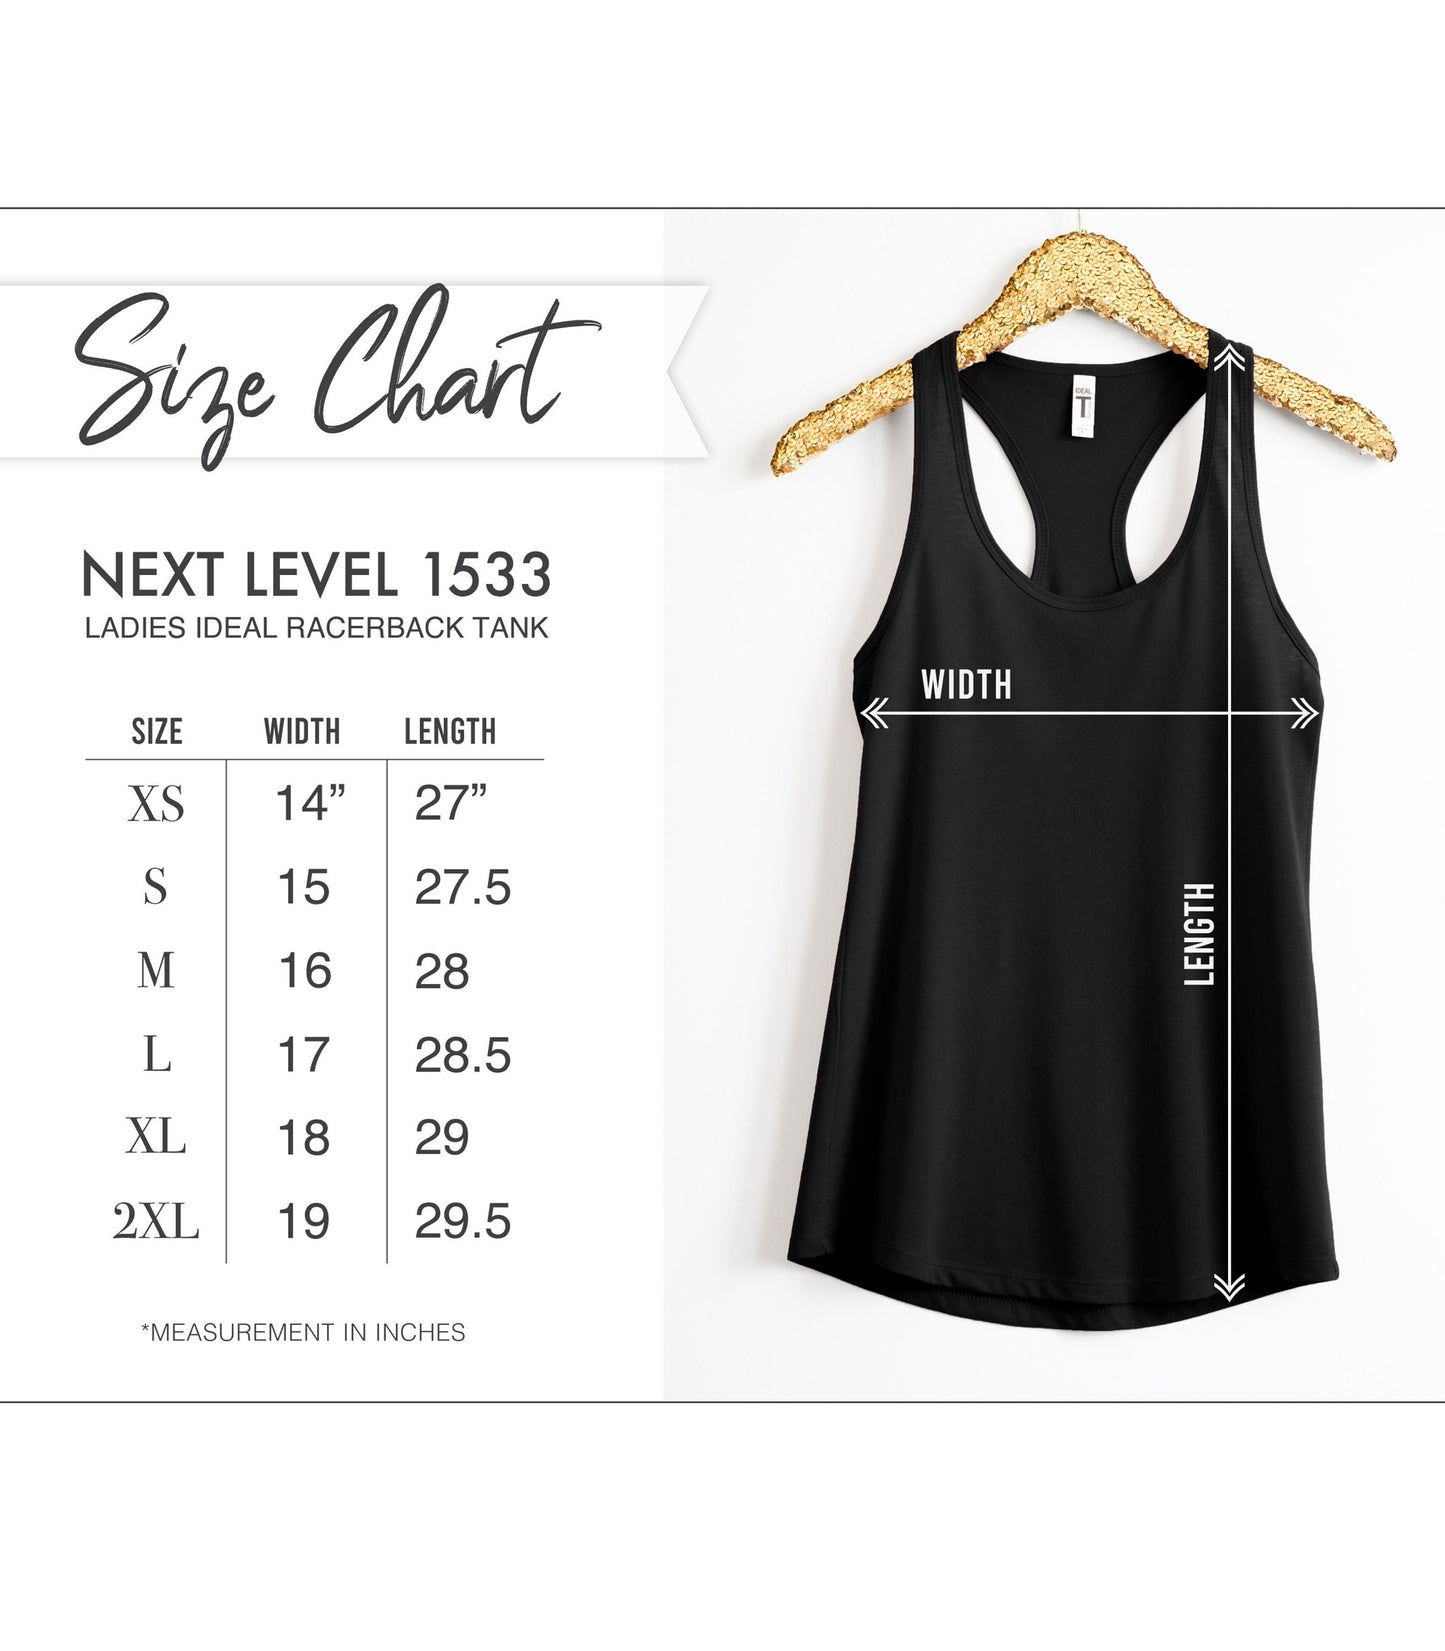 Stay Caffeinated in Style: Women's Ideal Racerback Tank for Coffee Lovers!